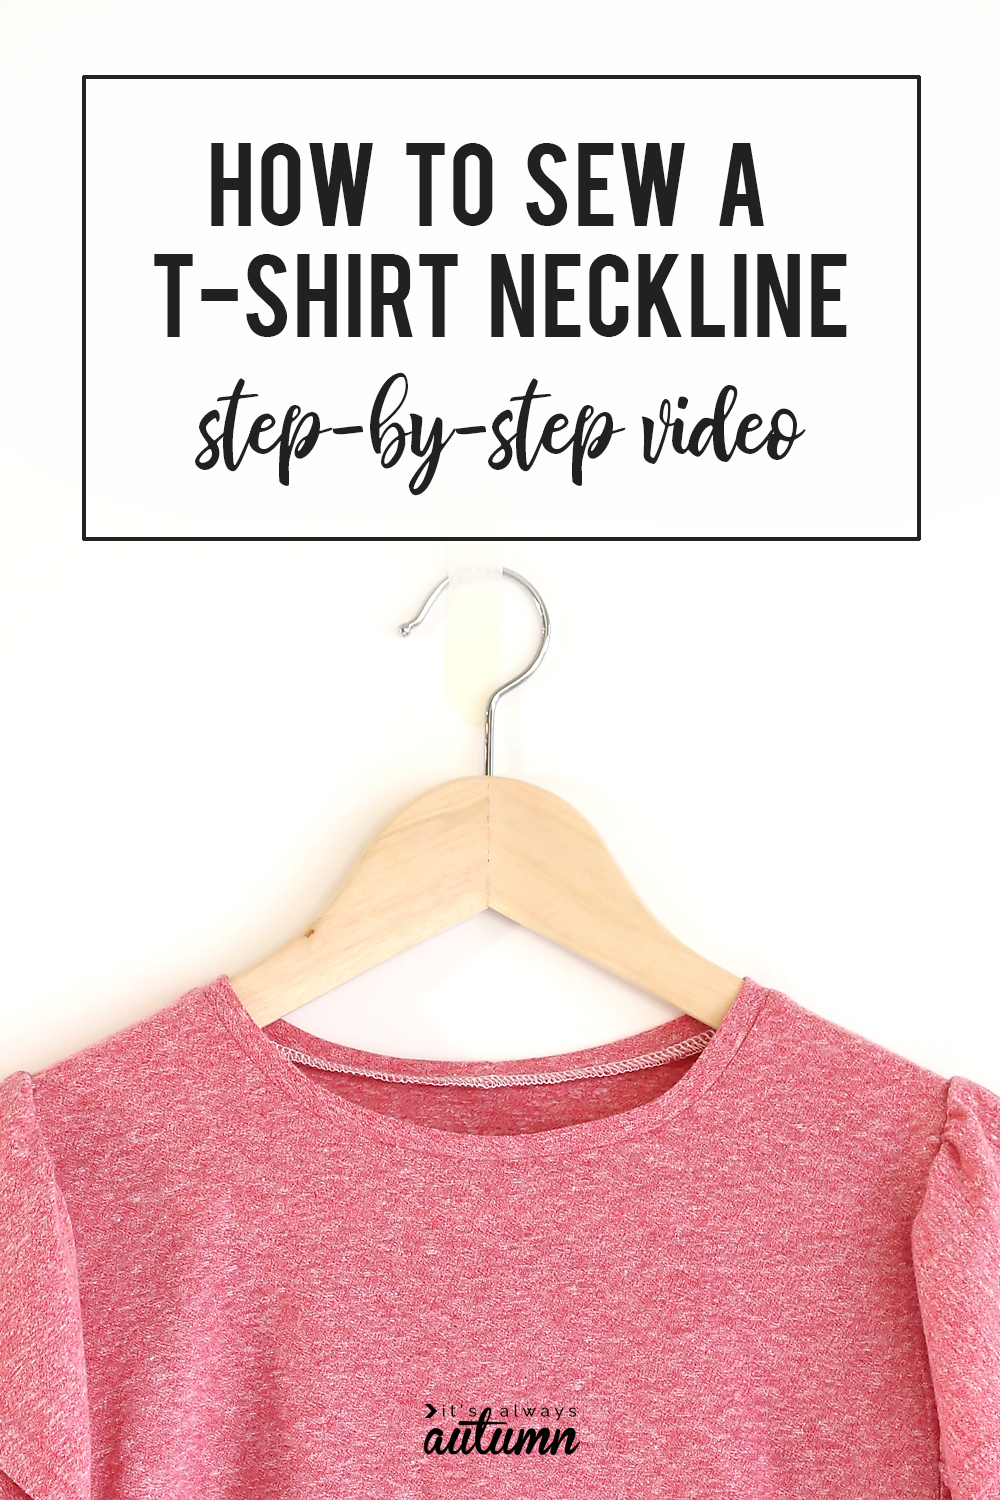 Learn how to sew the neckline on a t-shirt with this step by step video tutorial.